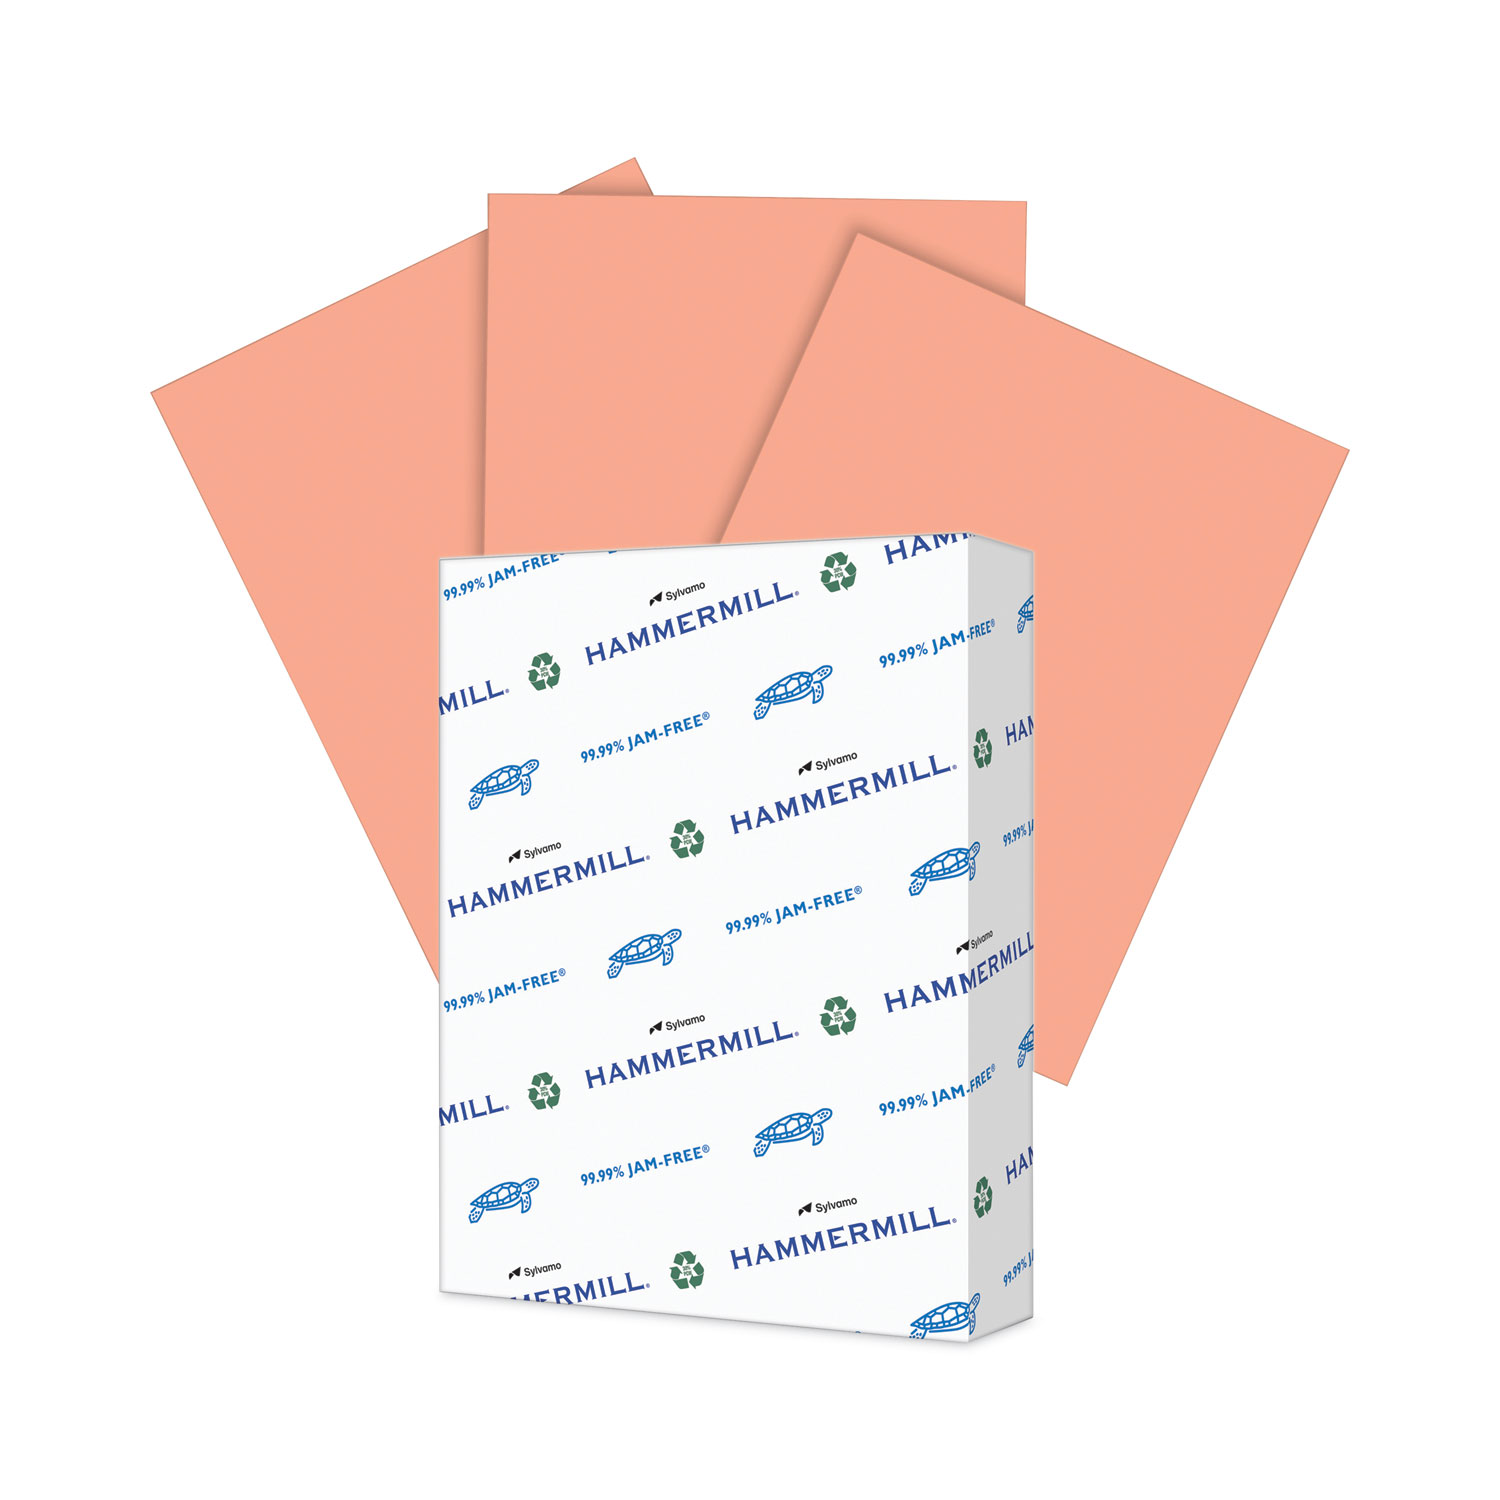  8.5 x 11 Salmon Pastel Color Cardstock Paper - Great